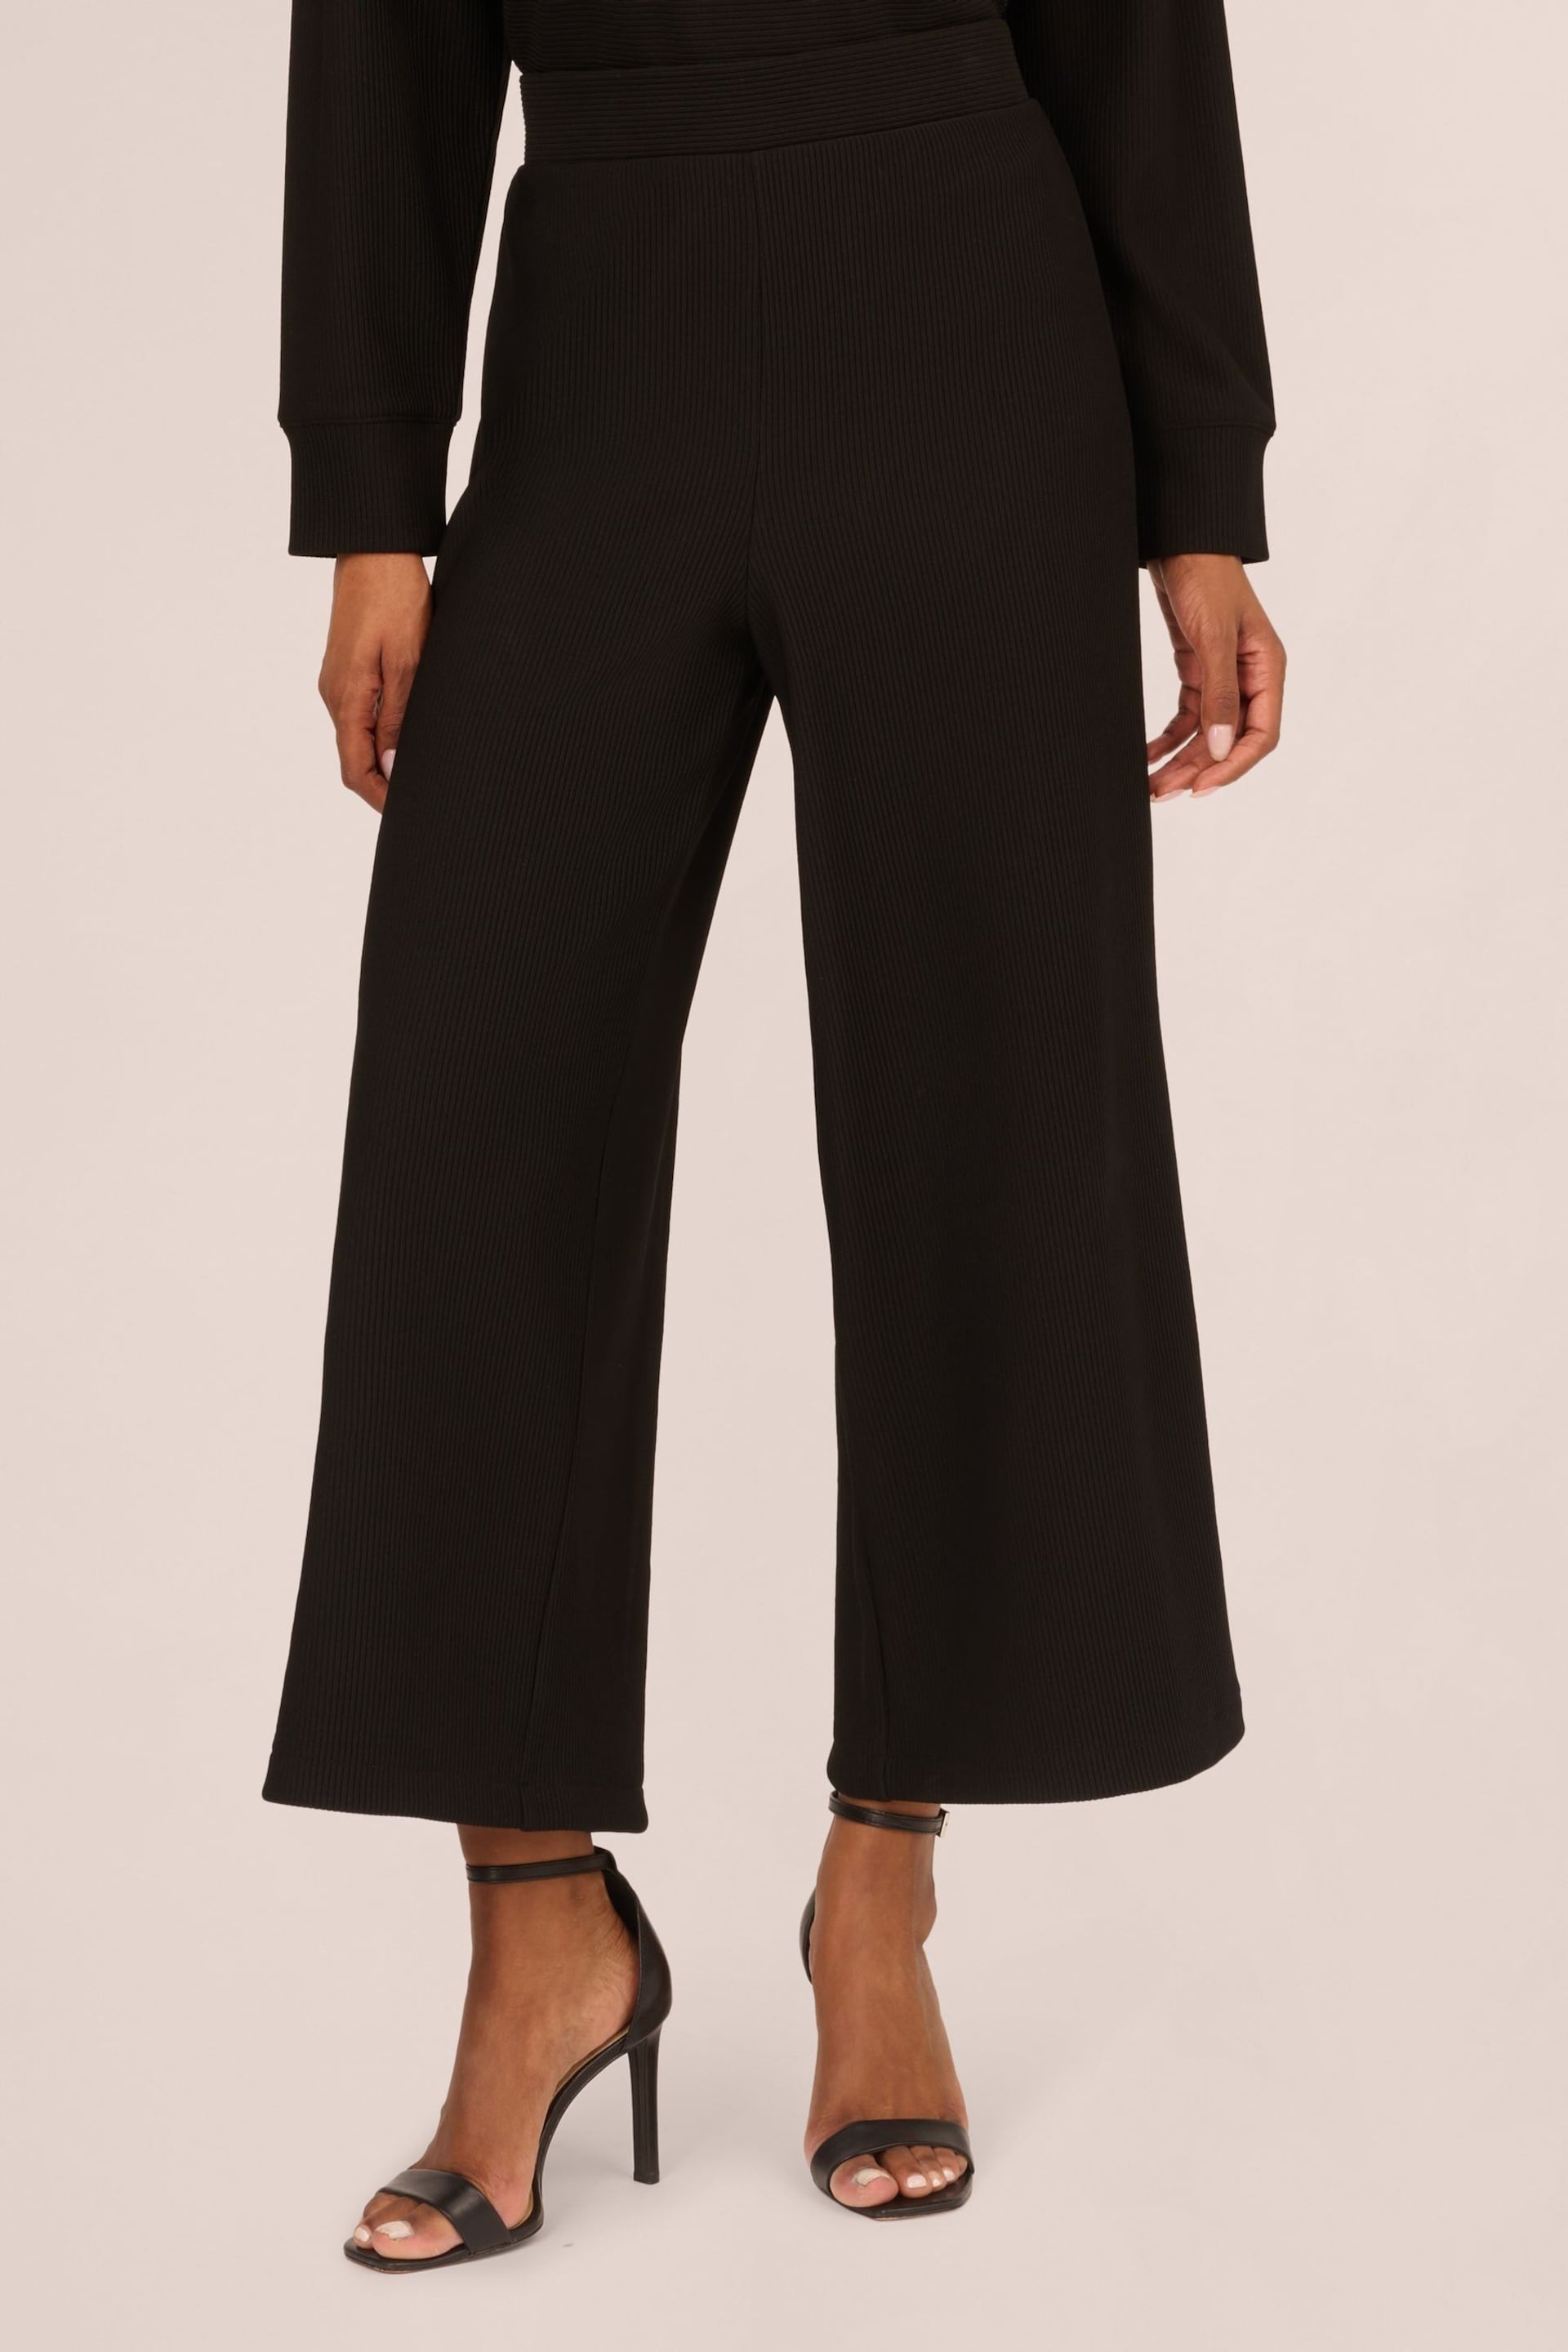 Adrianna Papell Ottoman Rib Knit Pull On Black Trousers - Image 1 of 7